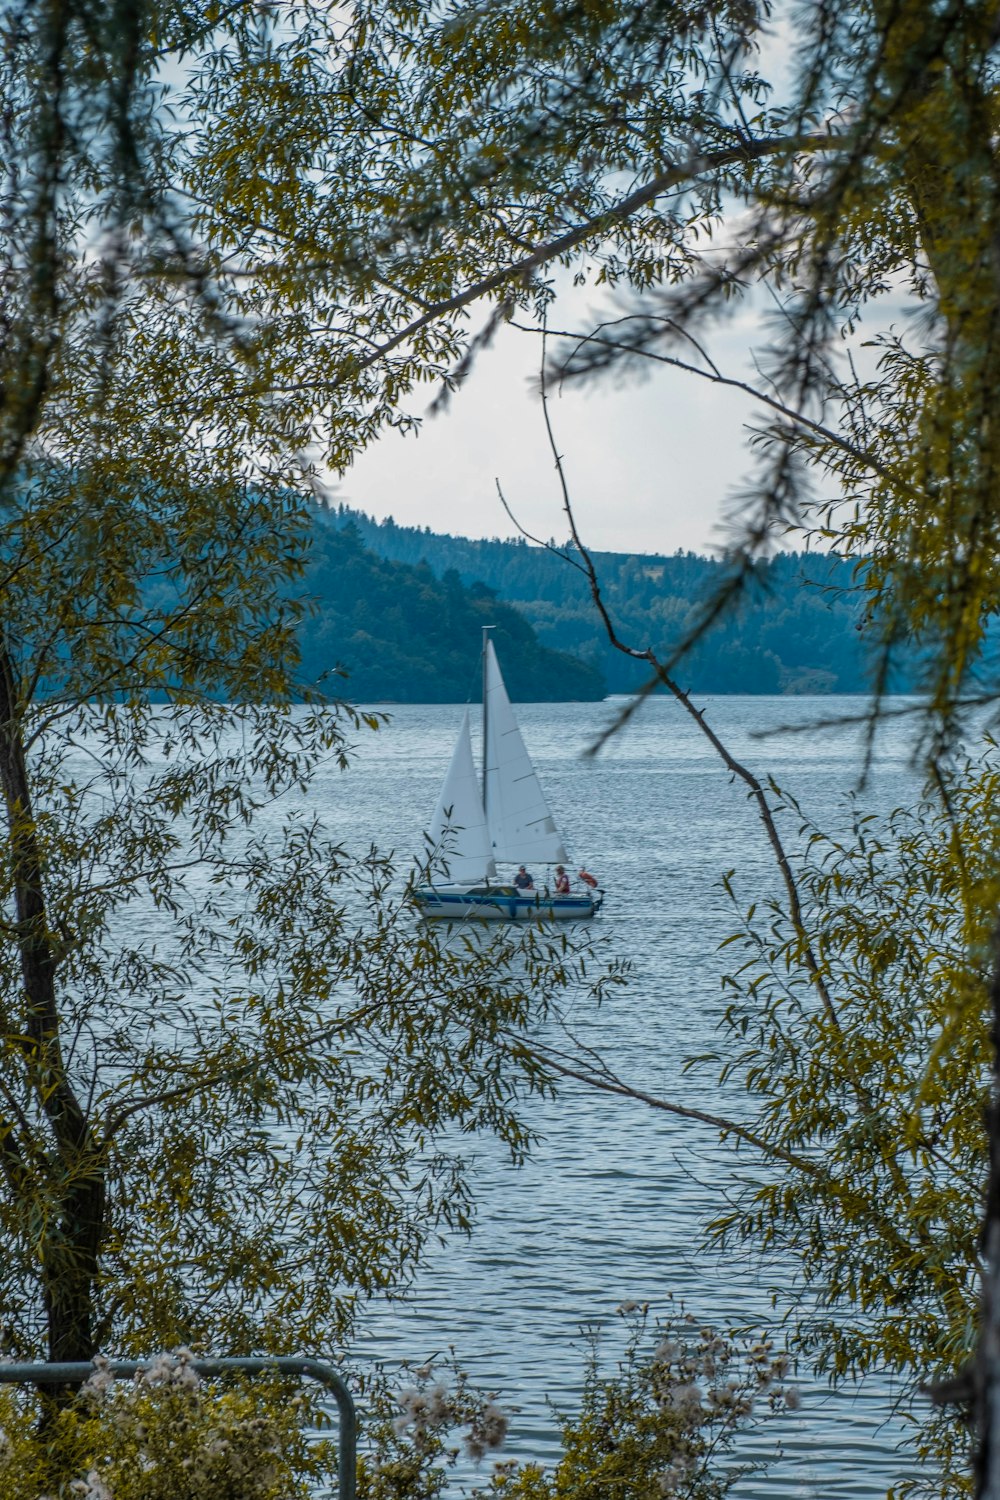 a sailboat on a lake with trees in the foreground